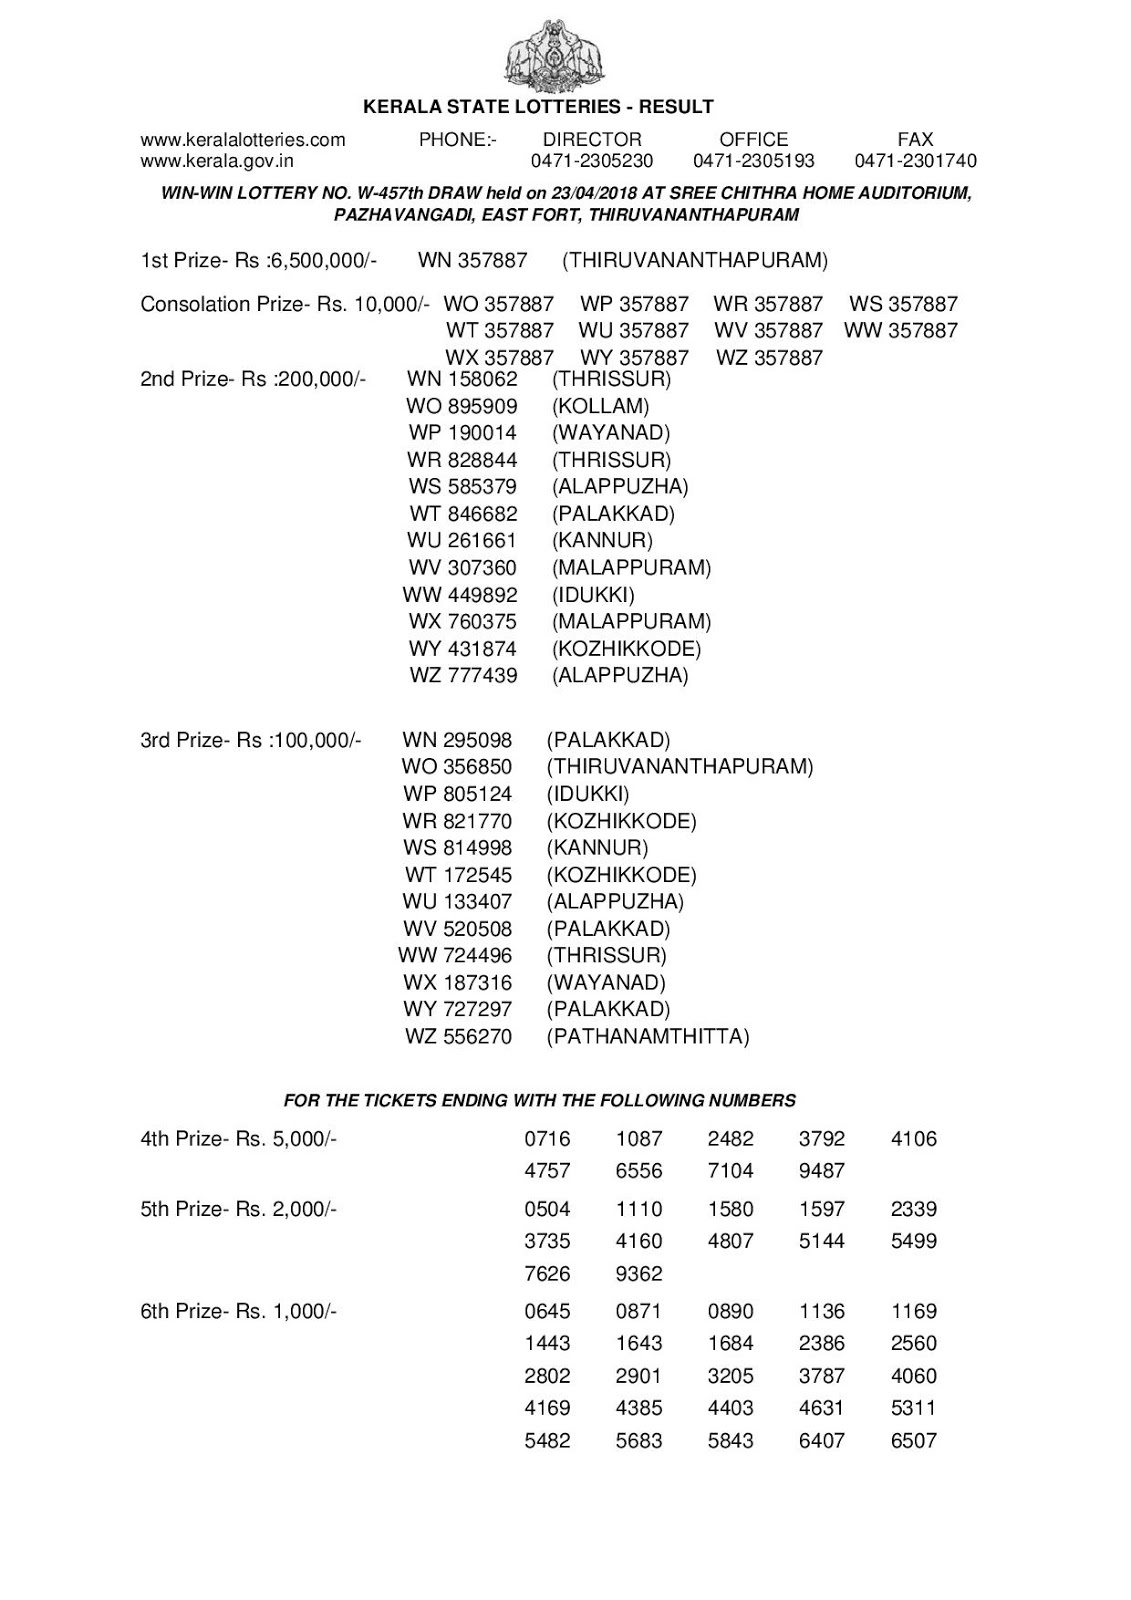 Kerala Lottery Result Today 23.04.2018 Win Win W-457 Lottery Results